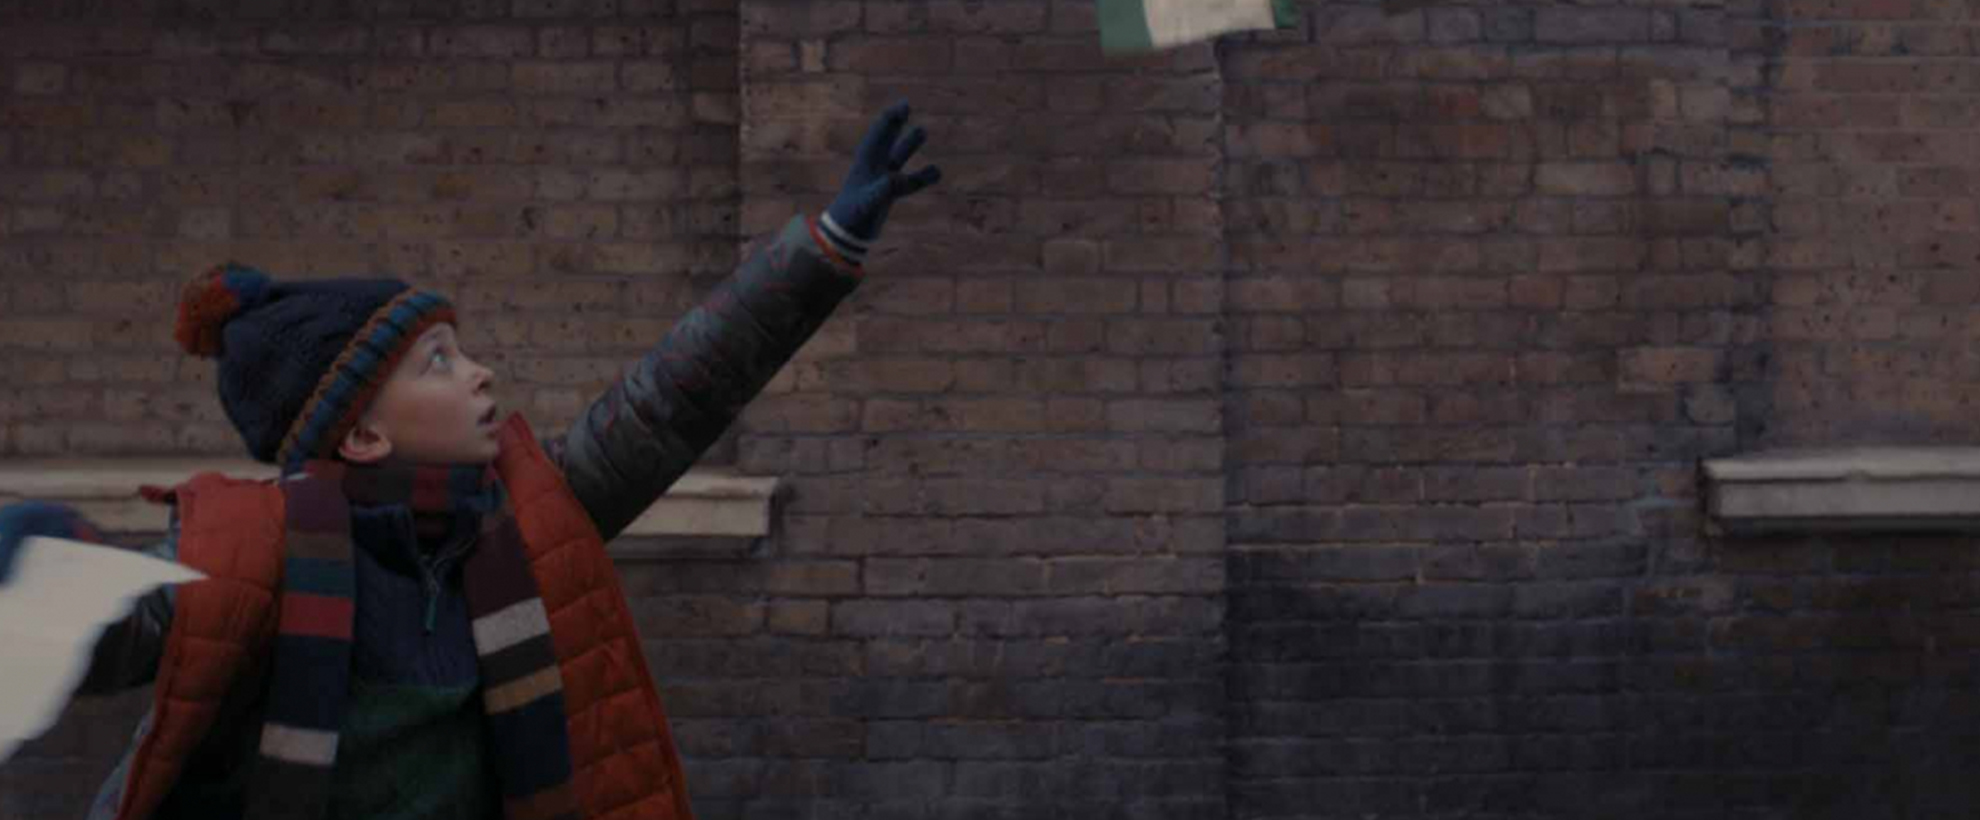 A young boy in winter clothing reaches up as his papers fly away